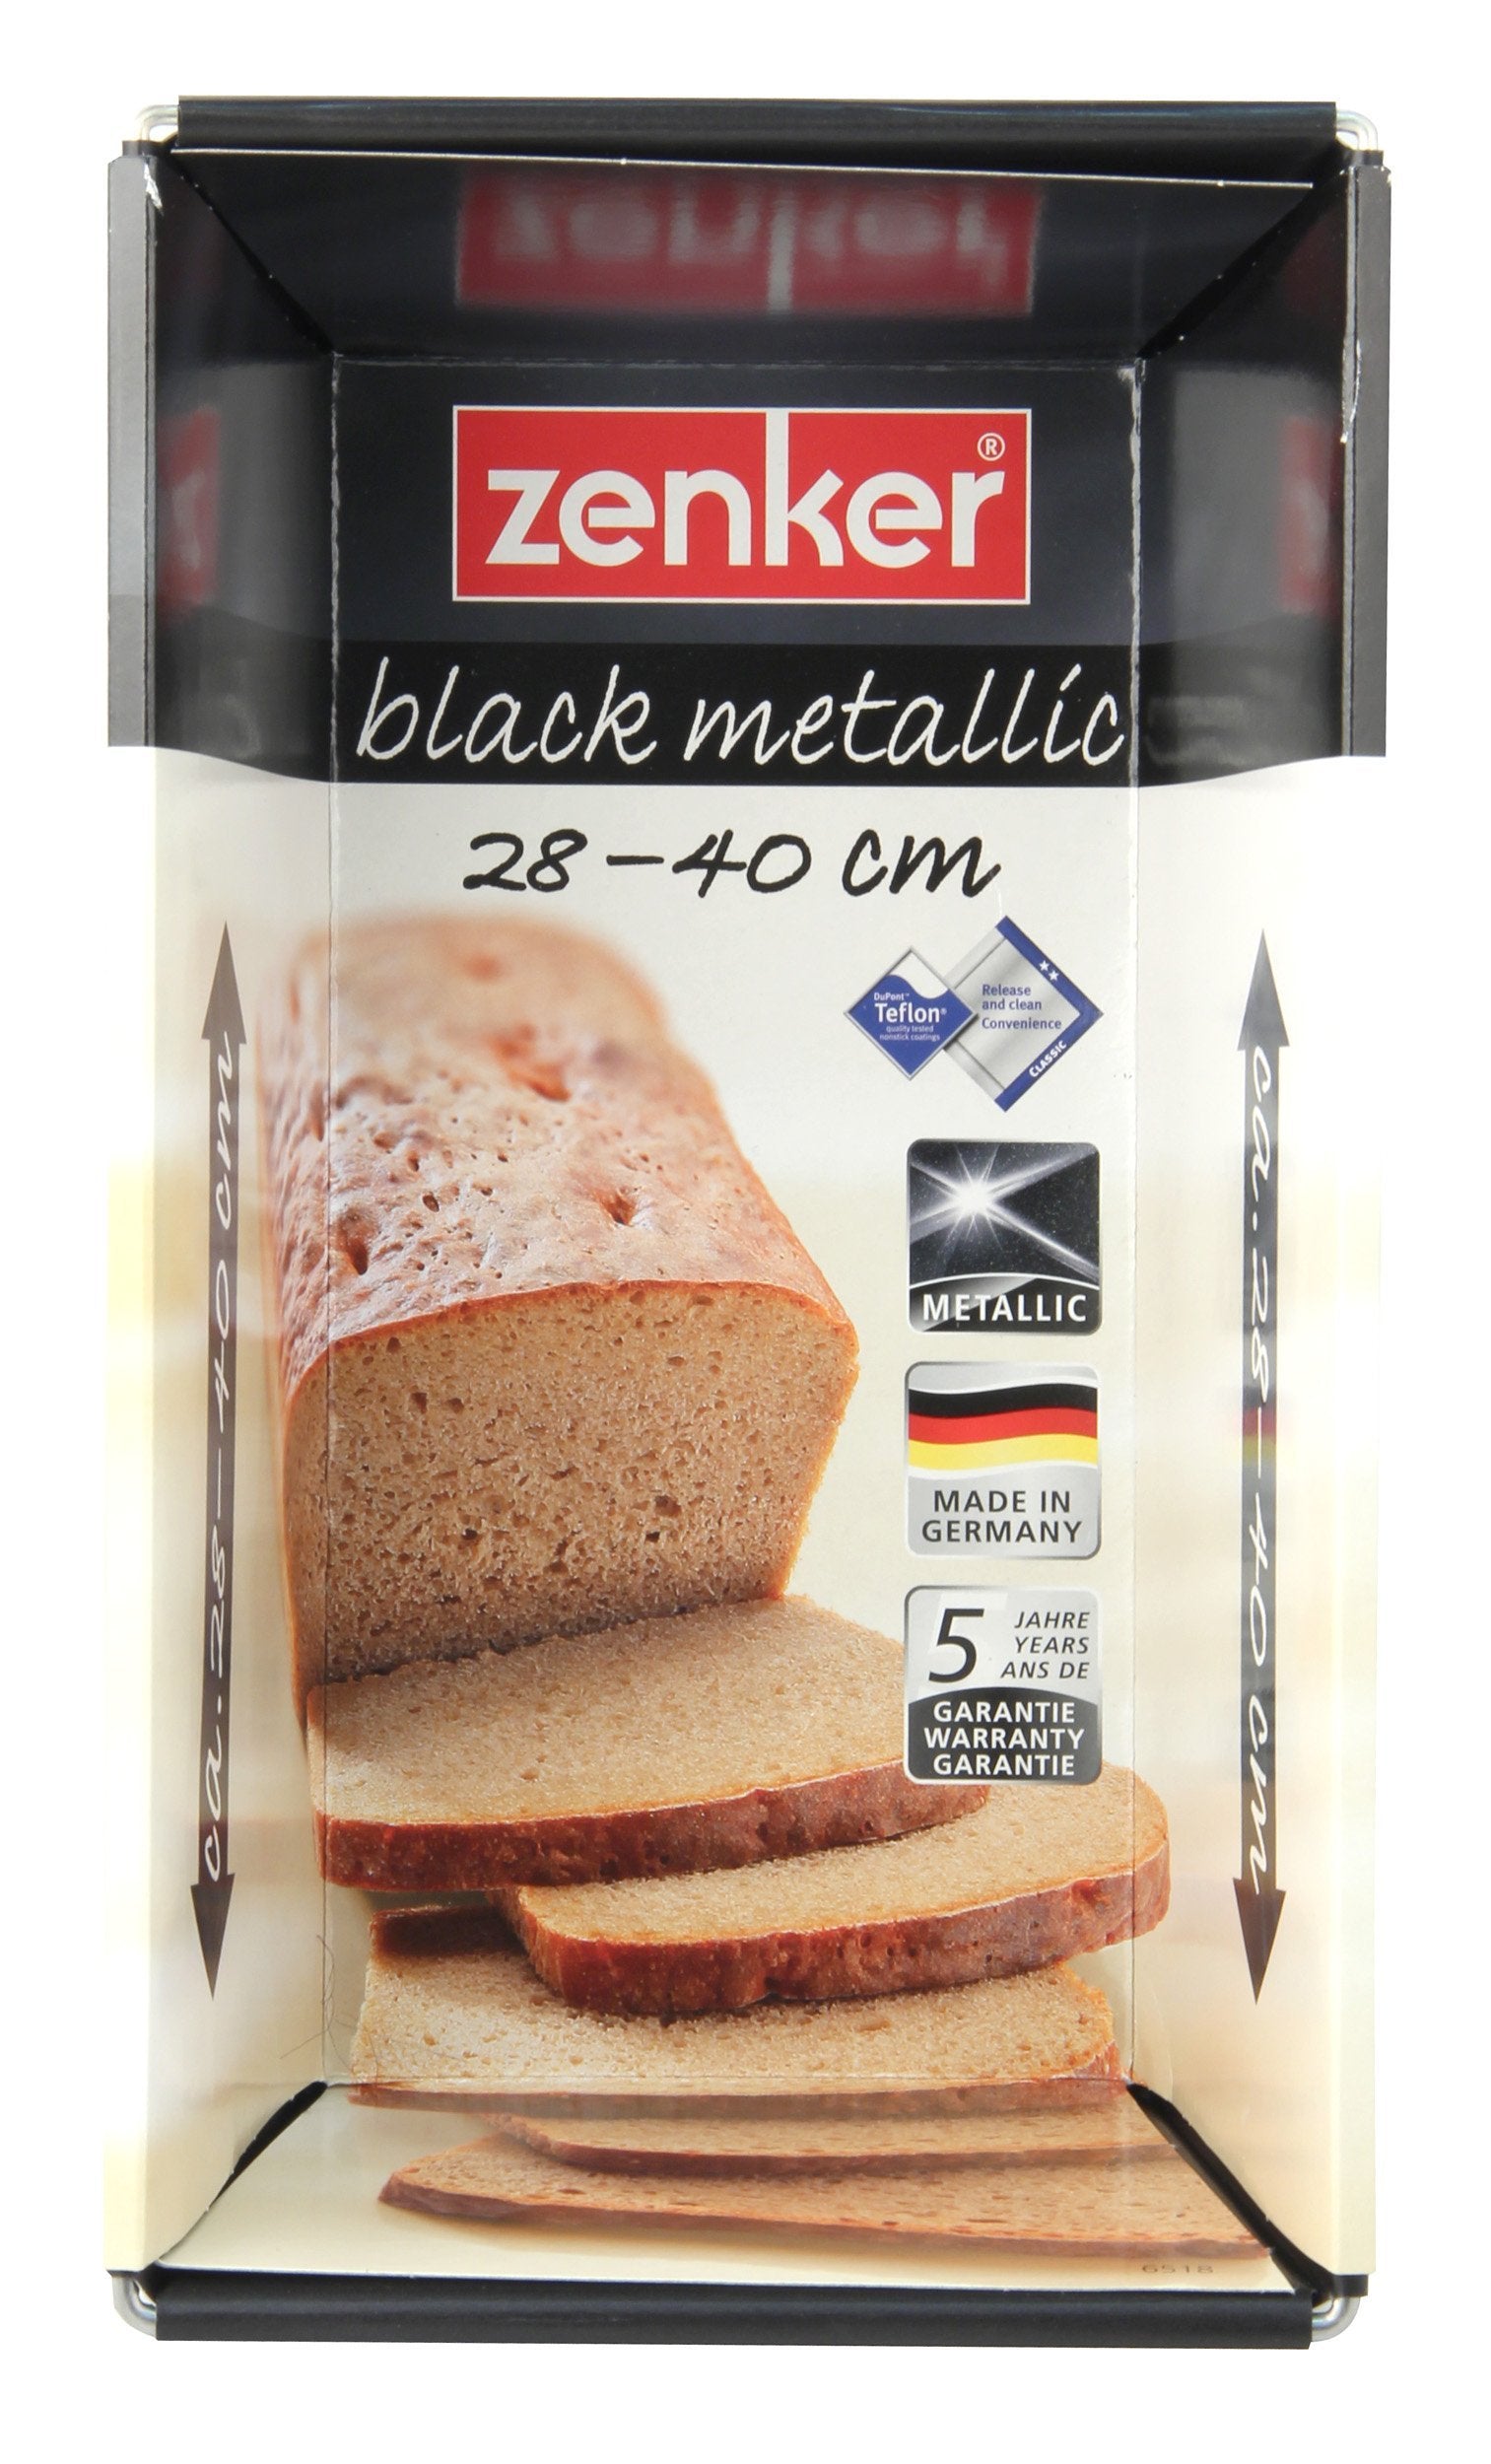 Zenker "Black Metallic" Loaf-Tin Extendable, Black, 28-40X16X10 Cm - Whole and All